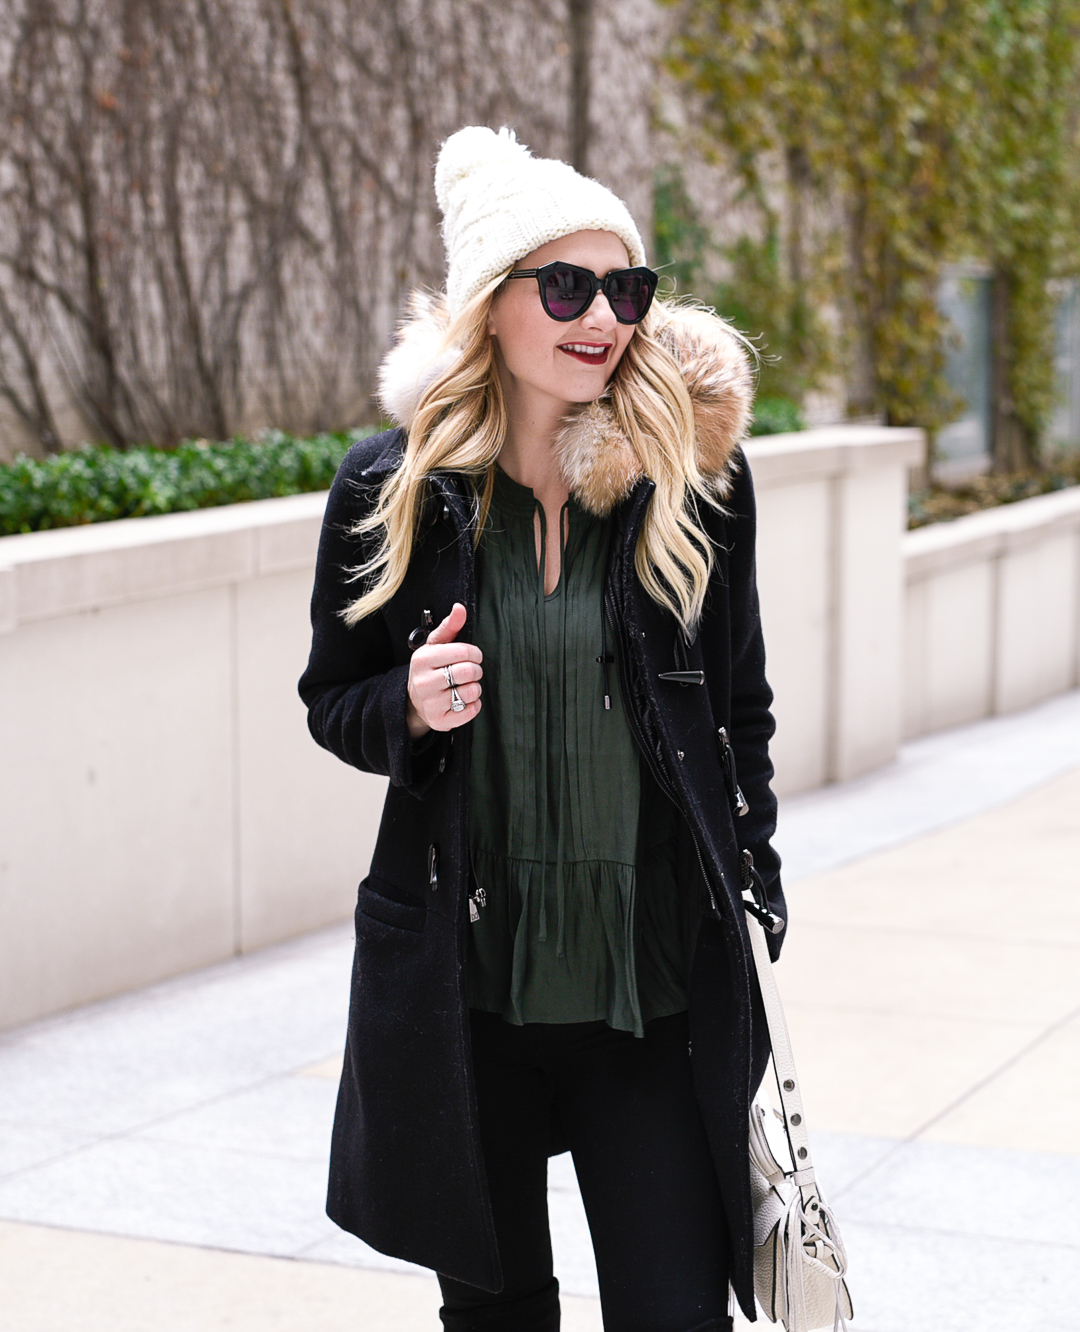 Ready for winter in this white pom beanie and green peplum top. 